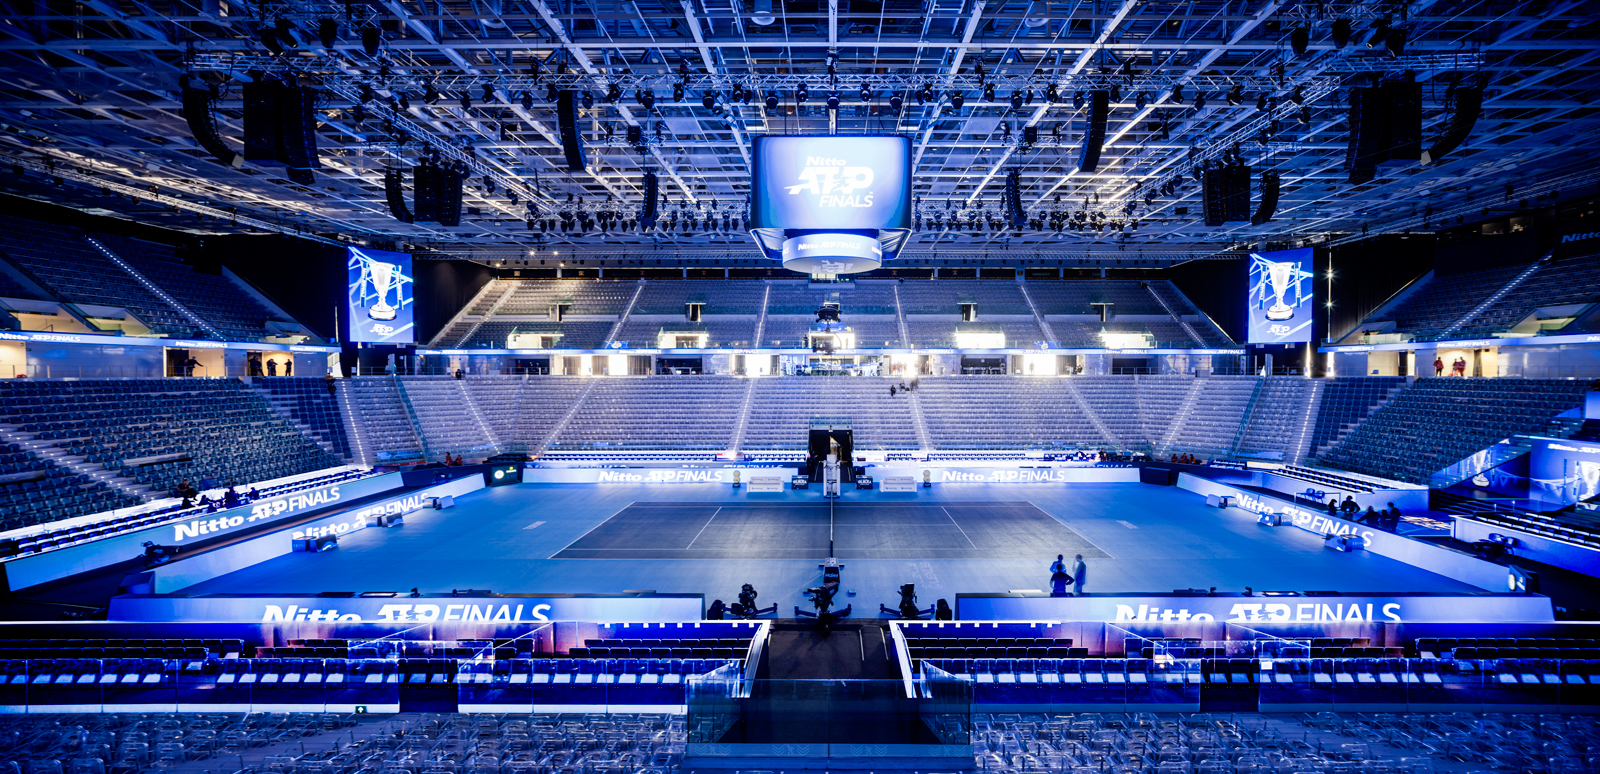 Events - NITTO ATP FINALS